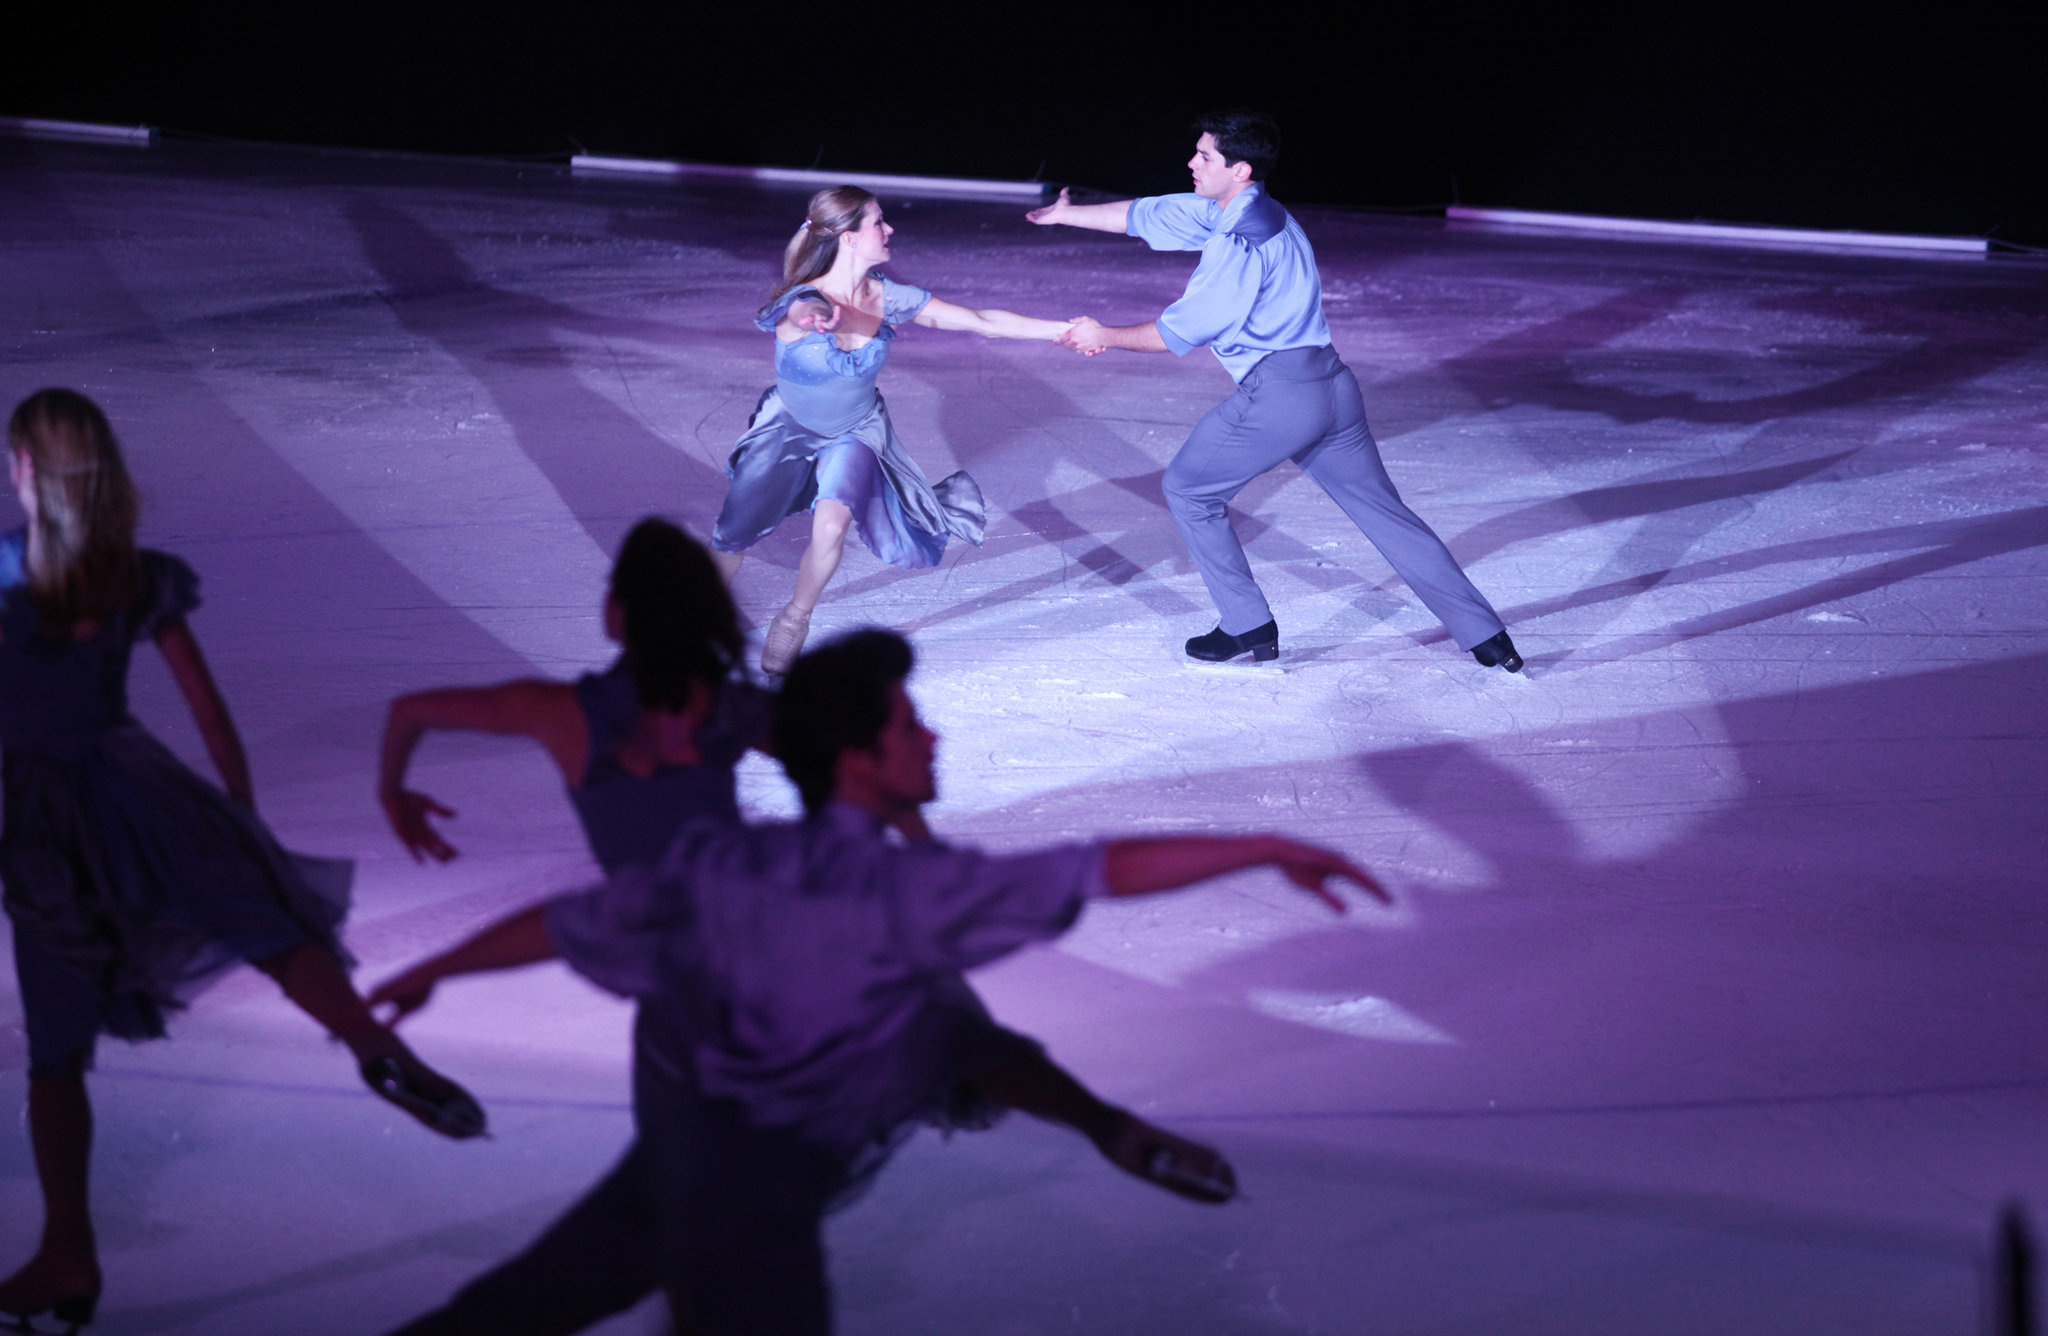 Ice Theatre: George Balanchine, Kim Navarro and Brent Bommentre performing “Reveries”, Edward Villella, Sky Rink at Chelsea Piers, NY. 2050x1340 HD Wallpaper.